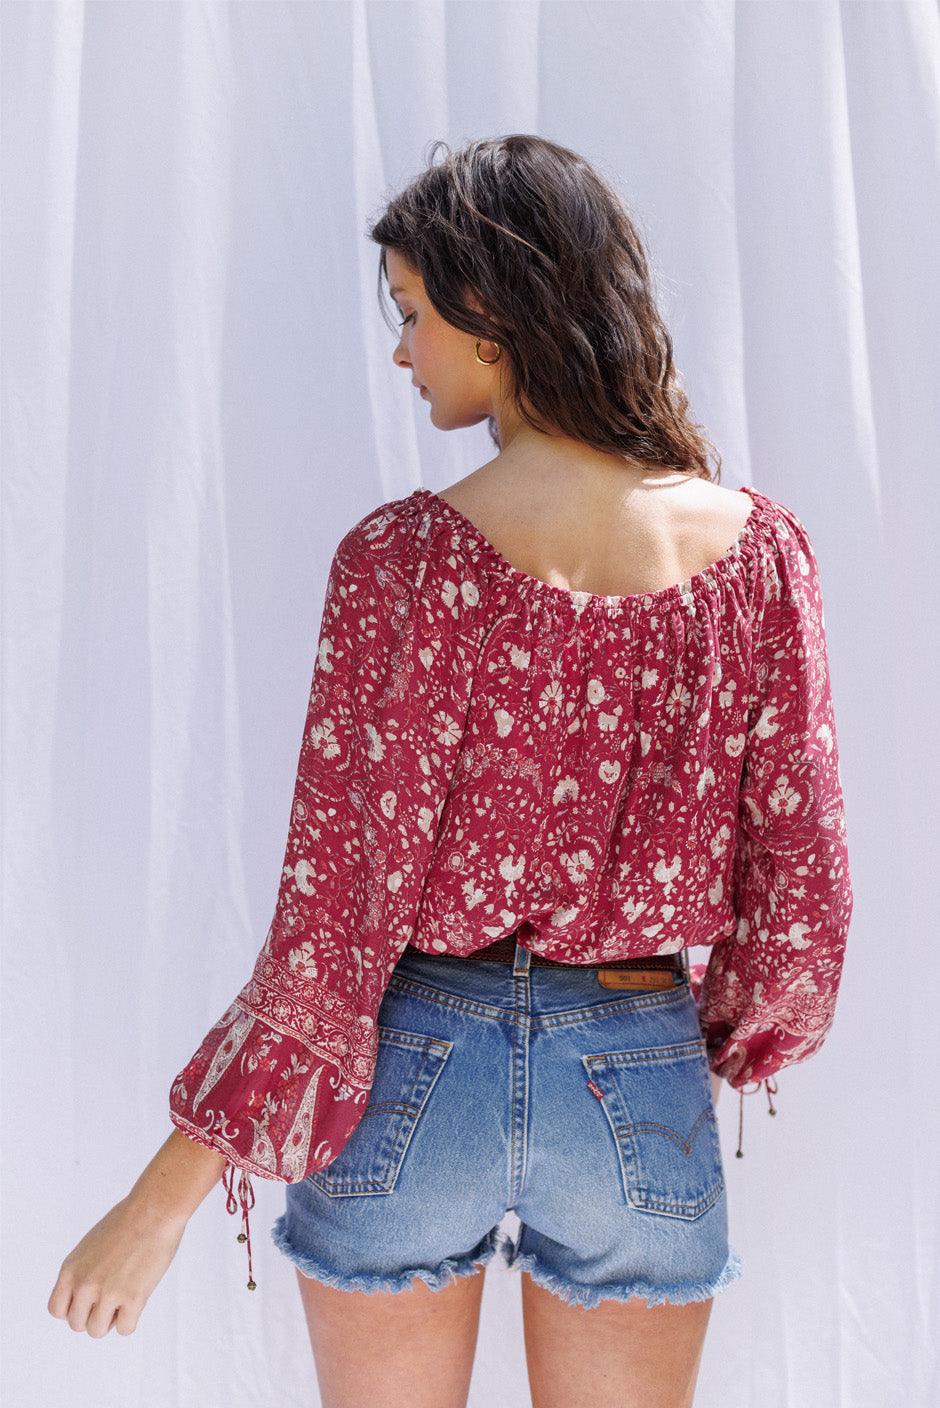 & Top Blouse Red | Ethical Luxury the Paneros Clothing - Print Canyon Floral Sustainable